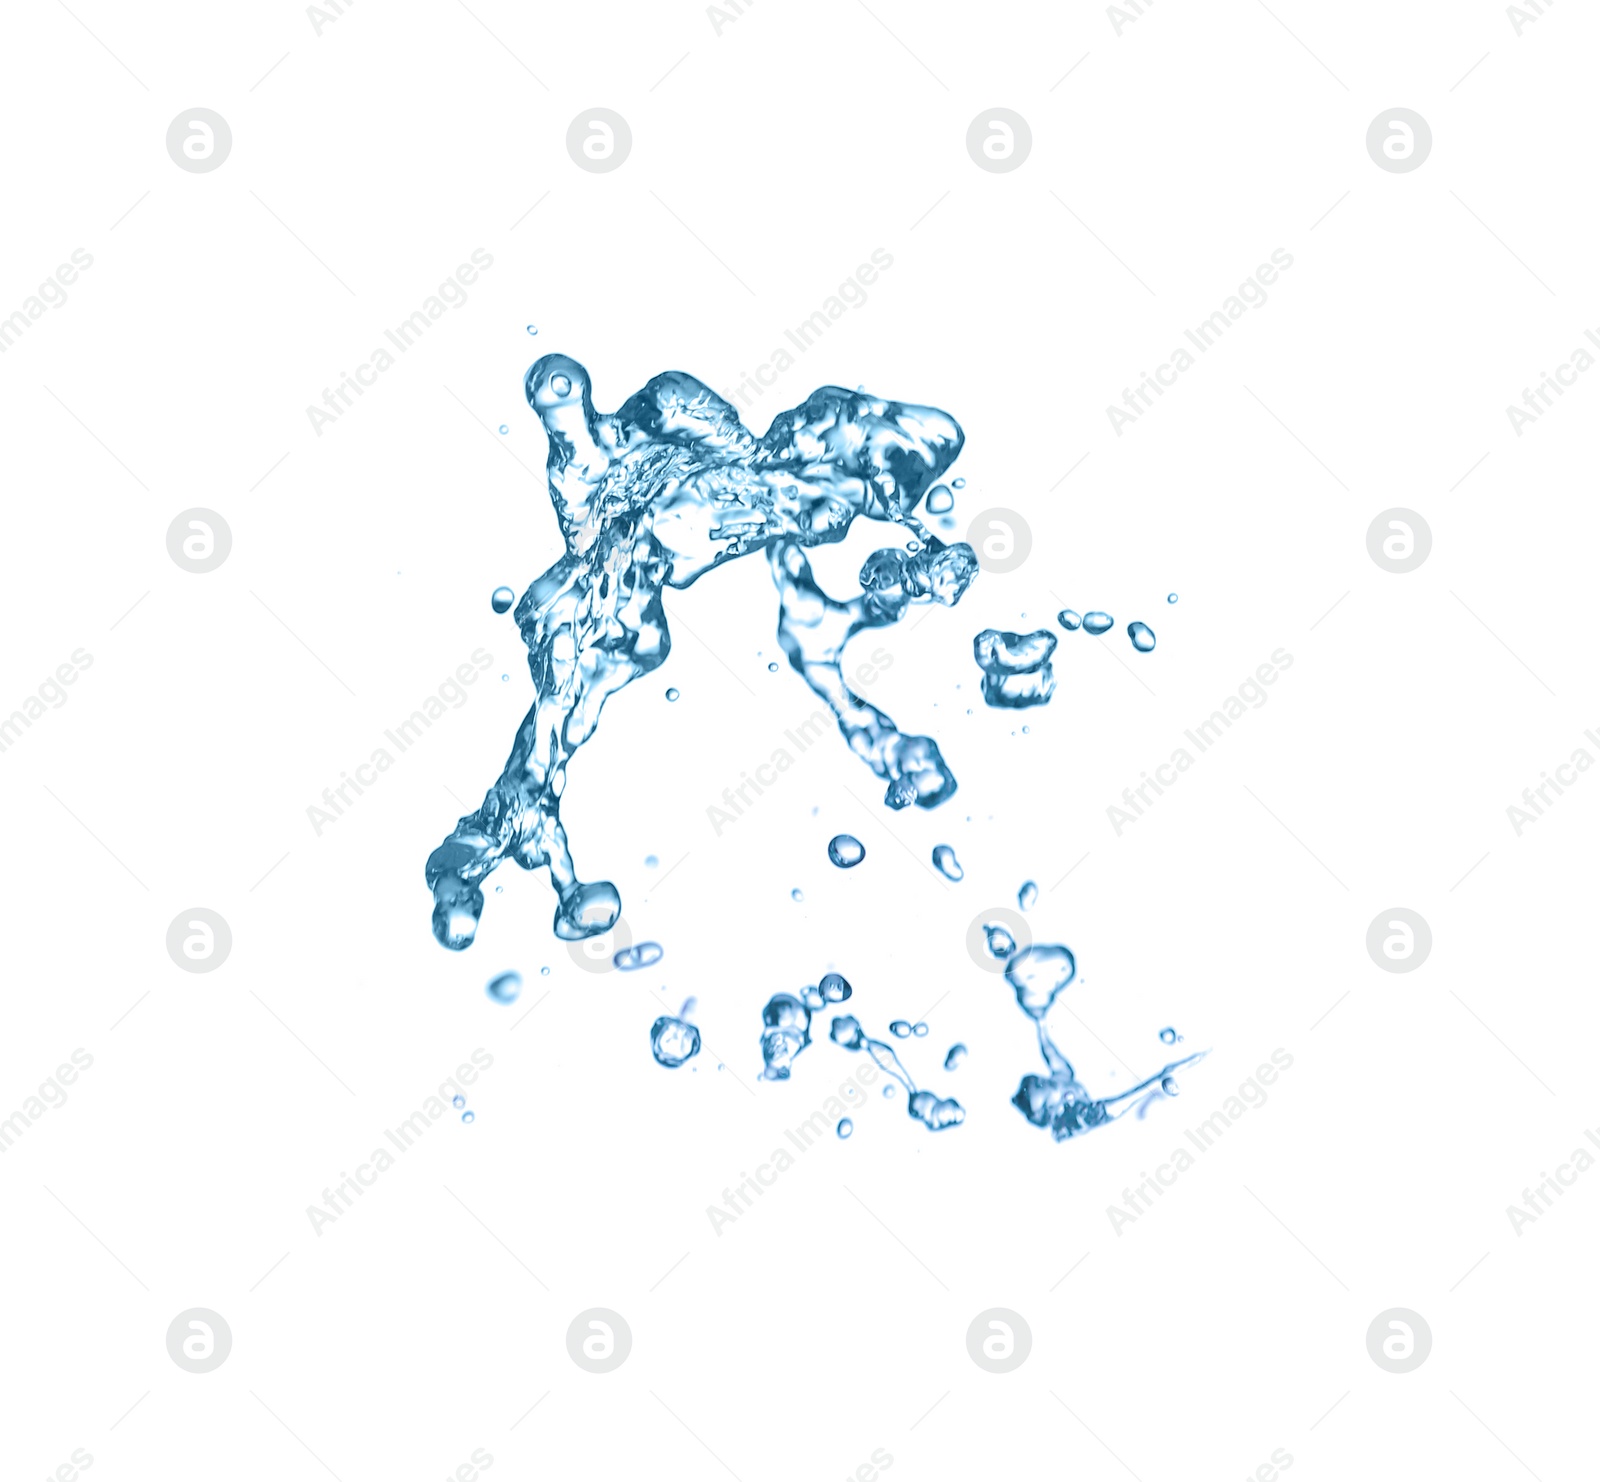 Photo of Abstract splash of water on white background